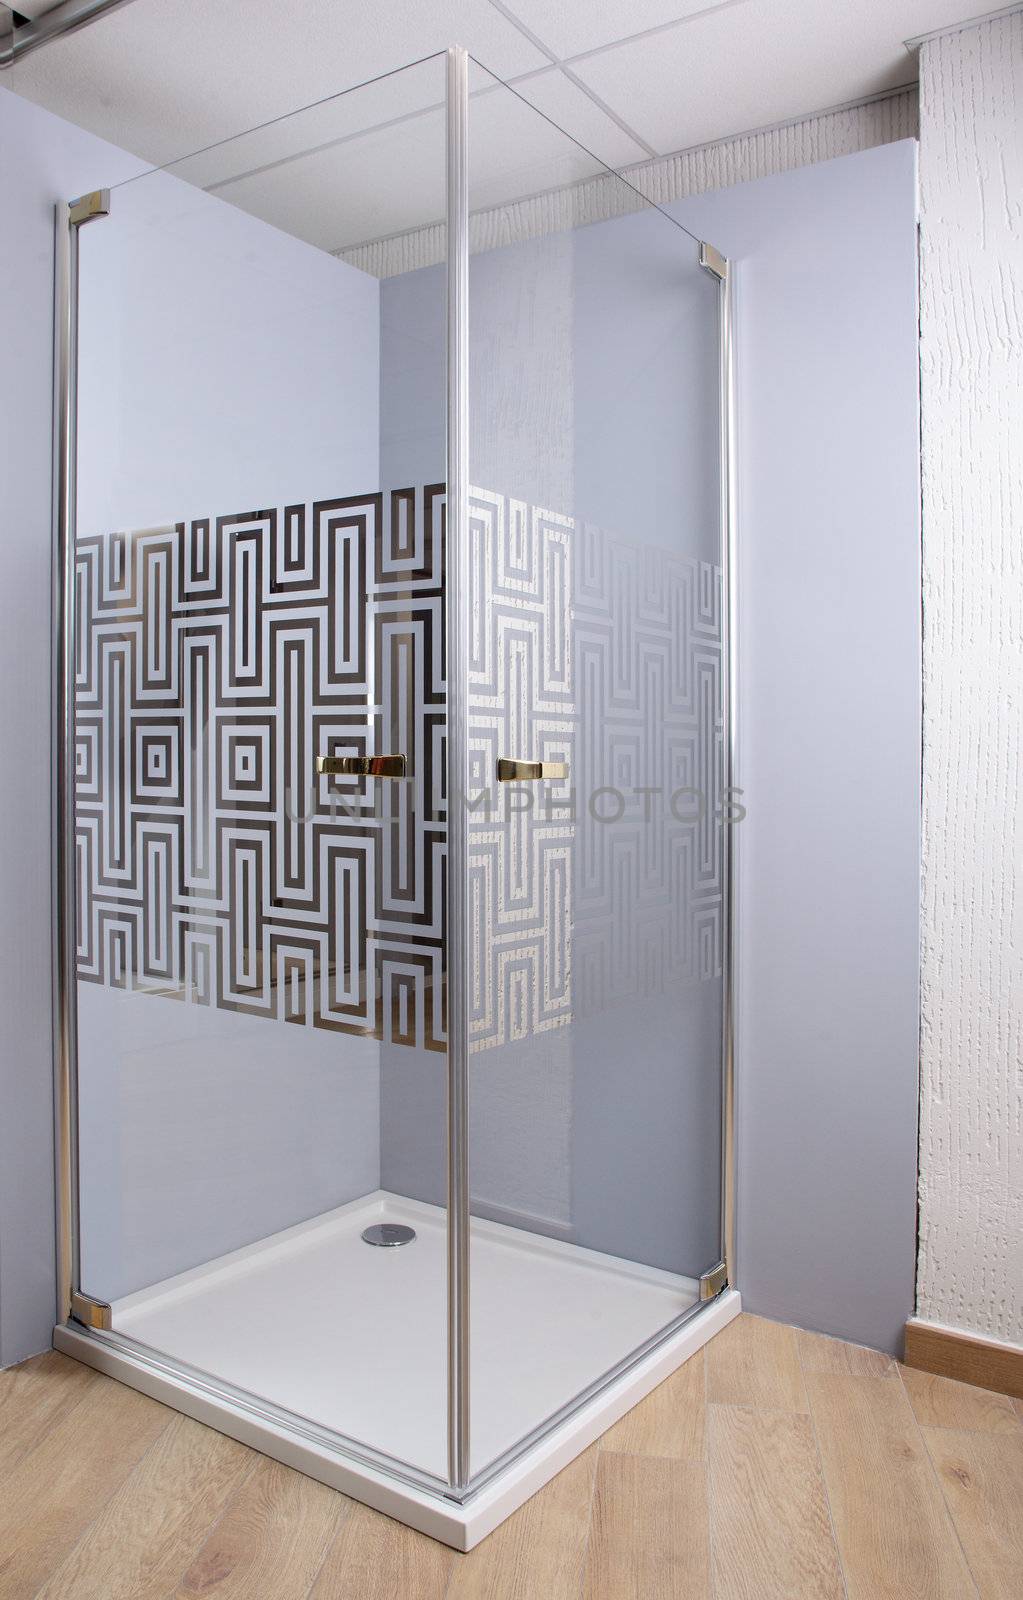 Brand new shower on bright background and wooden floor